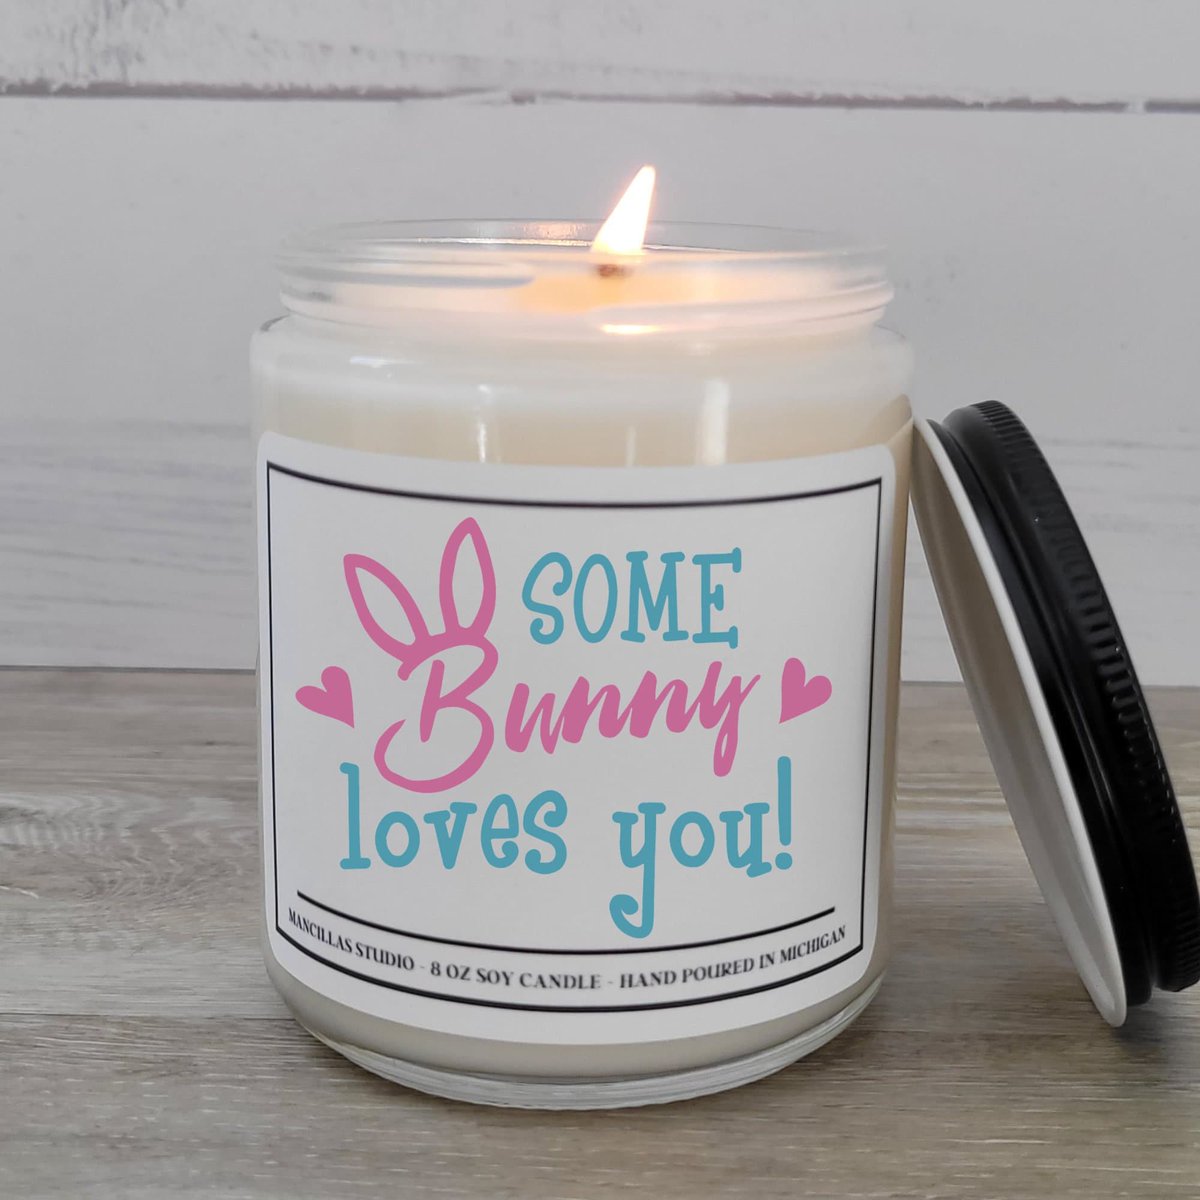 Excited to share the latest addition to my #etsy shop: Some Bunny Loves You Soy Wax Candle, Happy Easter Gift for Friend, 8 oz Soy Candle etsy.me/3mFsUt9 #white #soy #entryway #cotton #organicingredients #easter #blue #somebunnylovesyou #soycandle